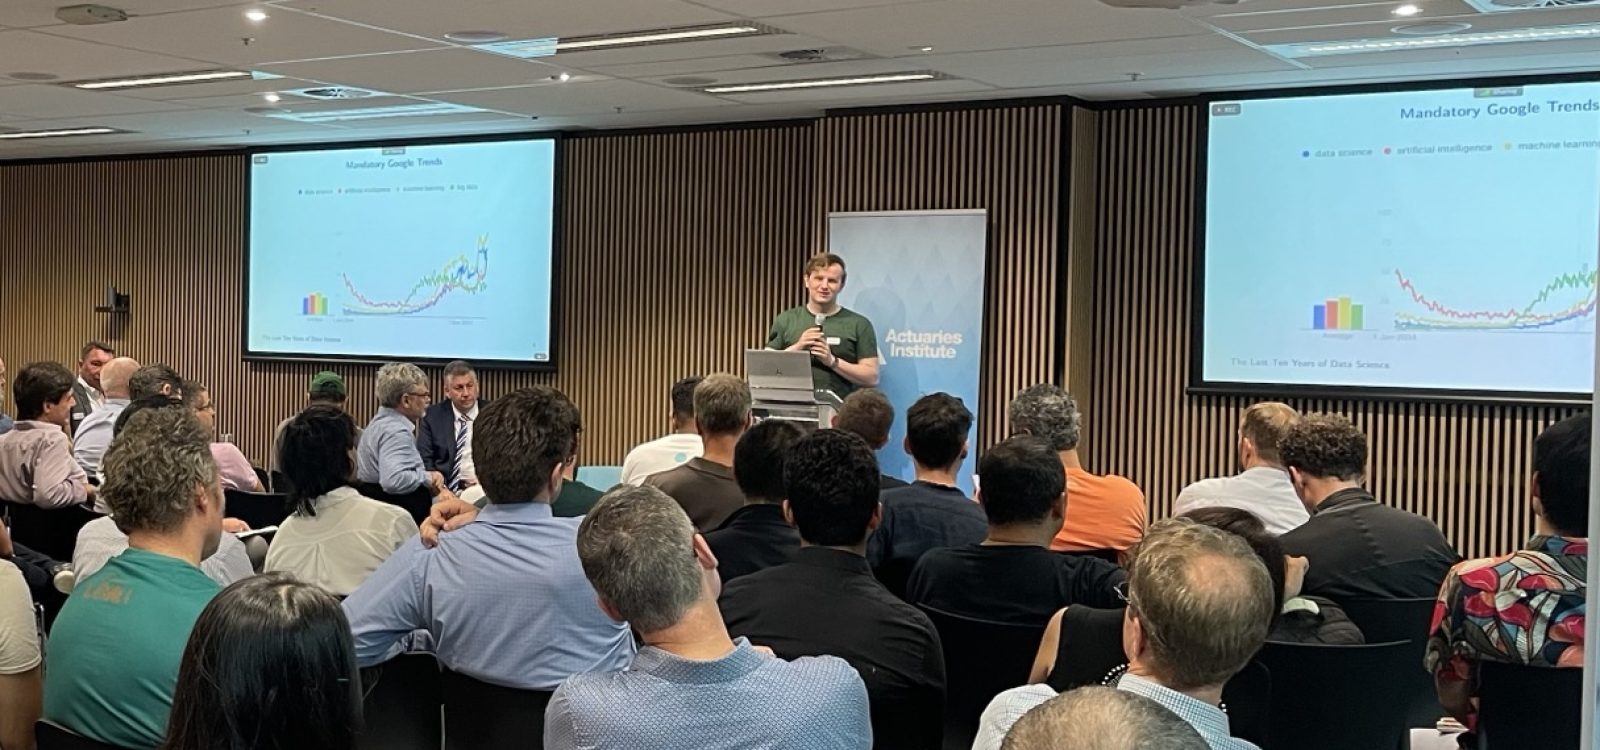 Actuaries Institute hosts Data Science Sydney Meetup: Chat GPT, pizza and more